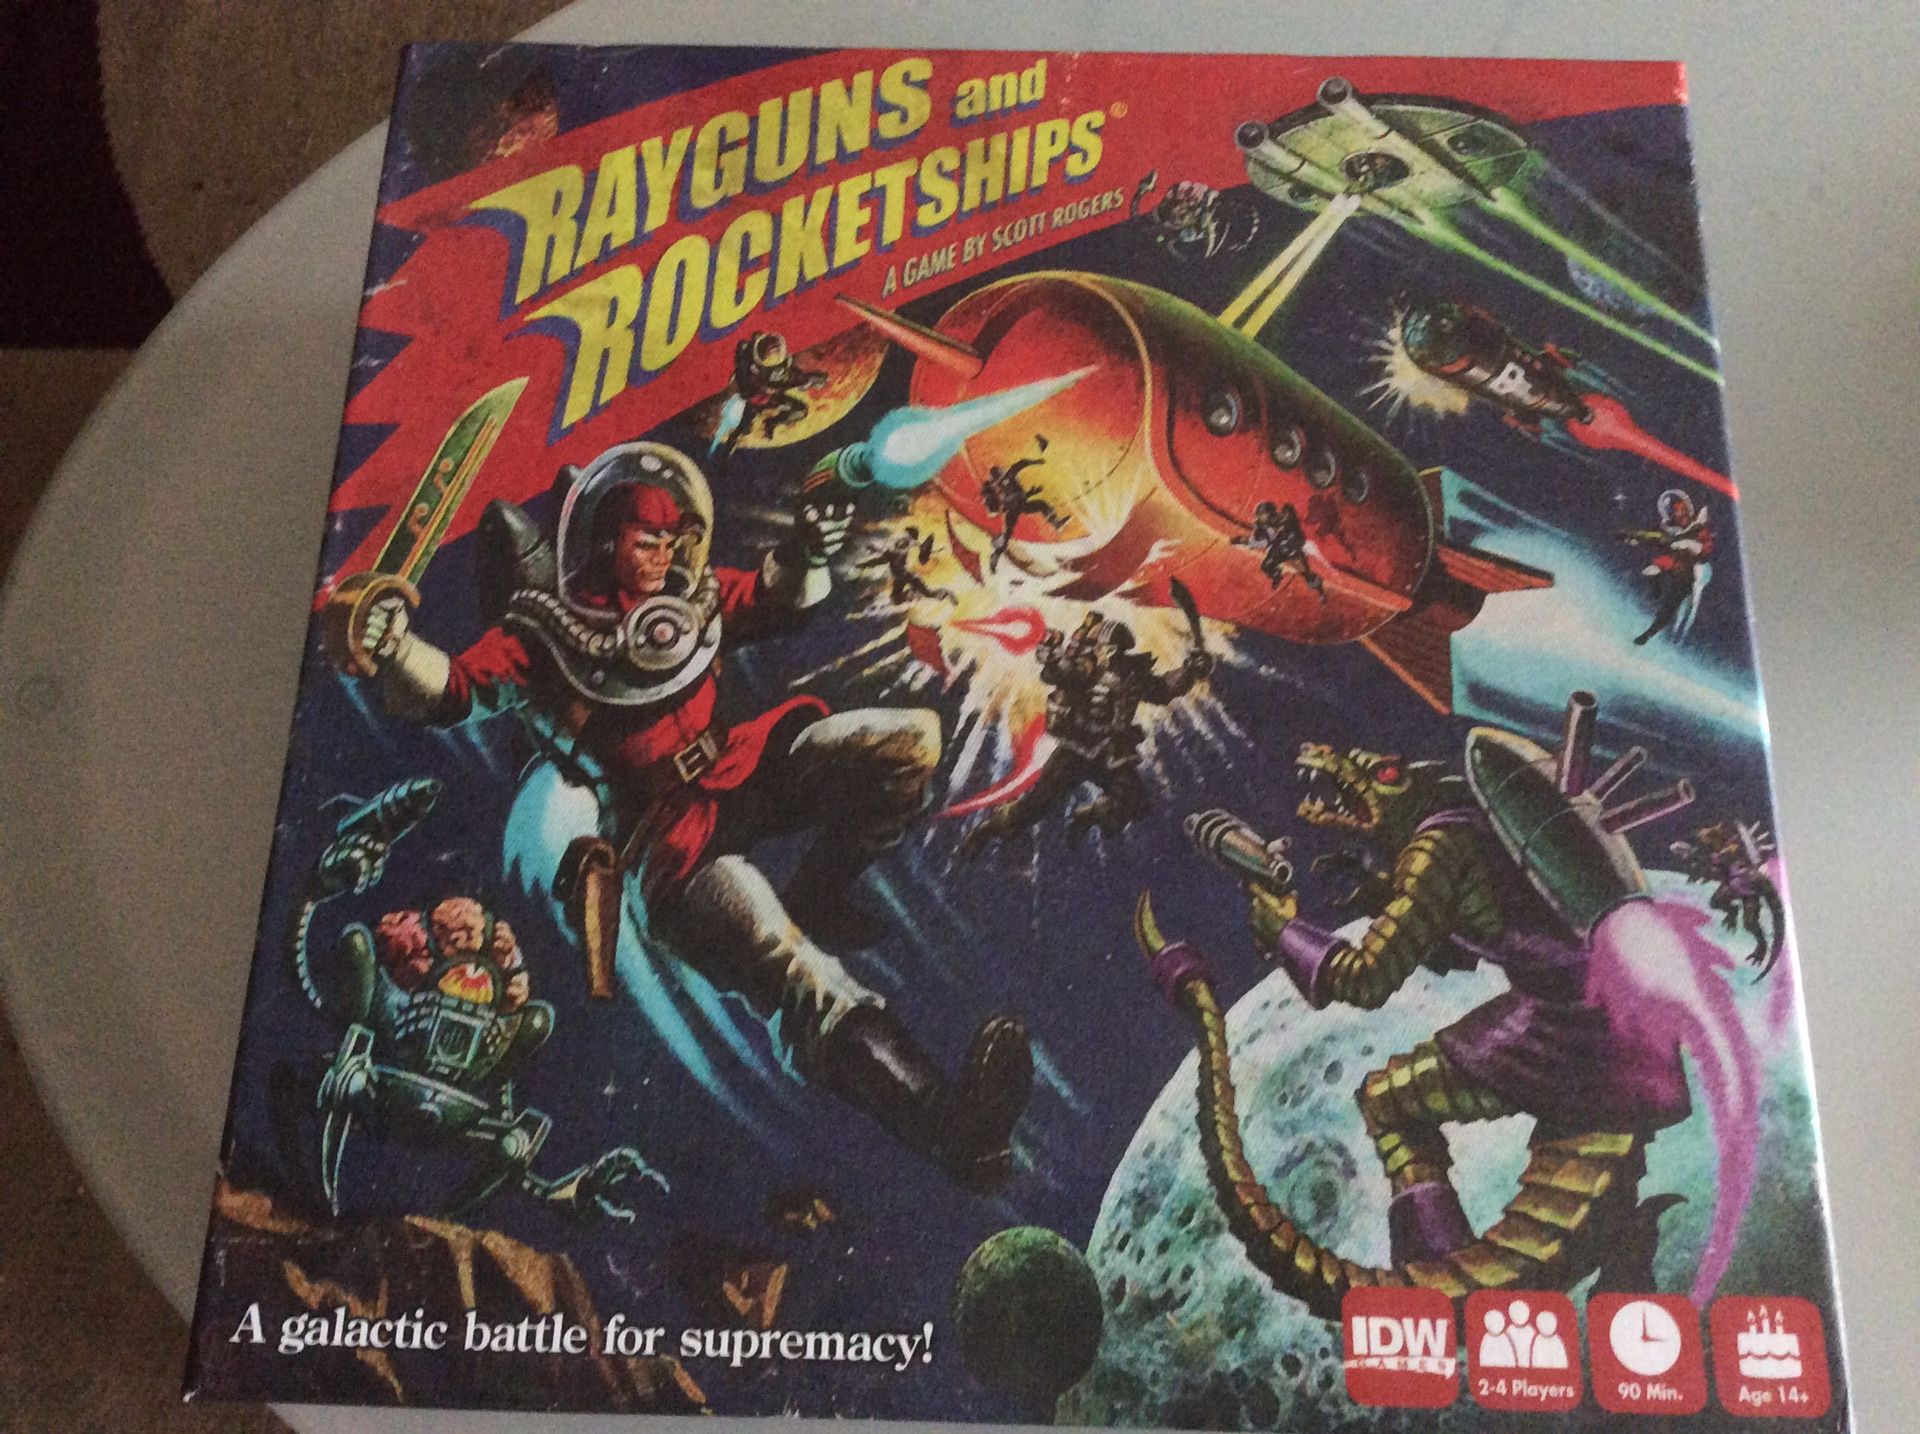 Board game - rayguns and rocketships